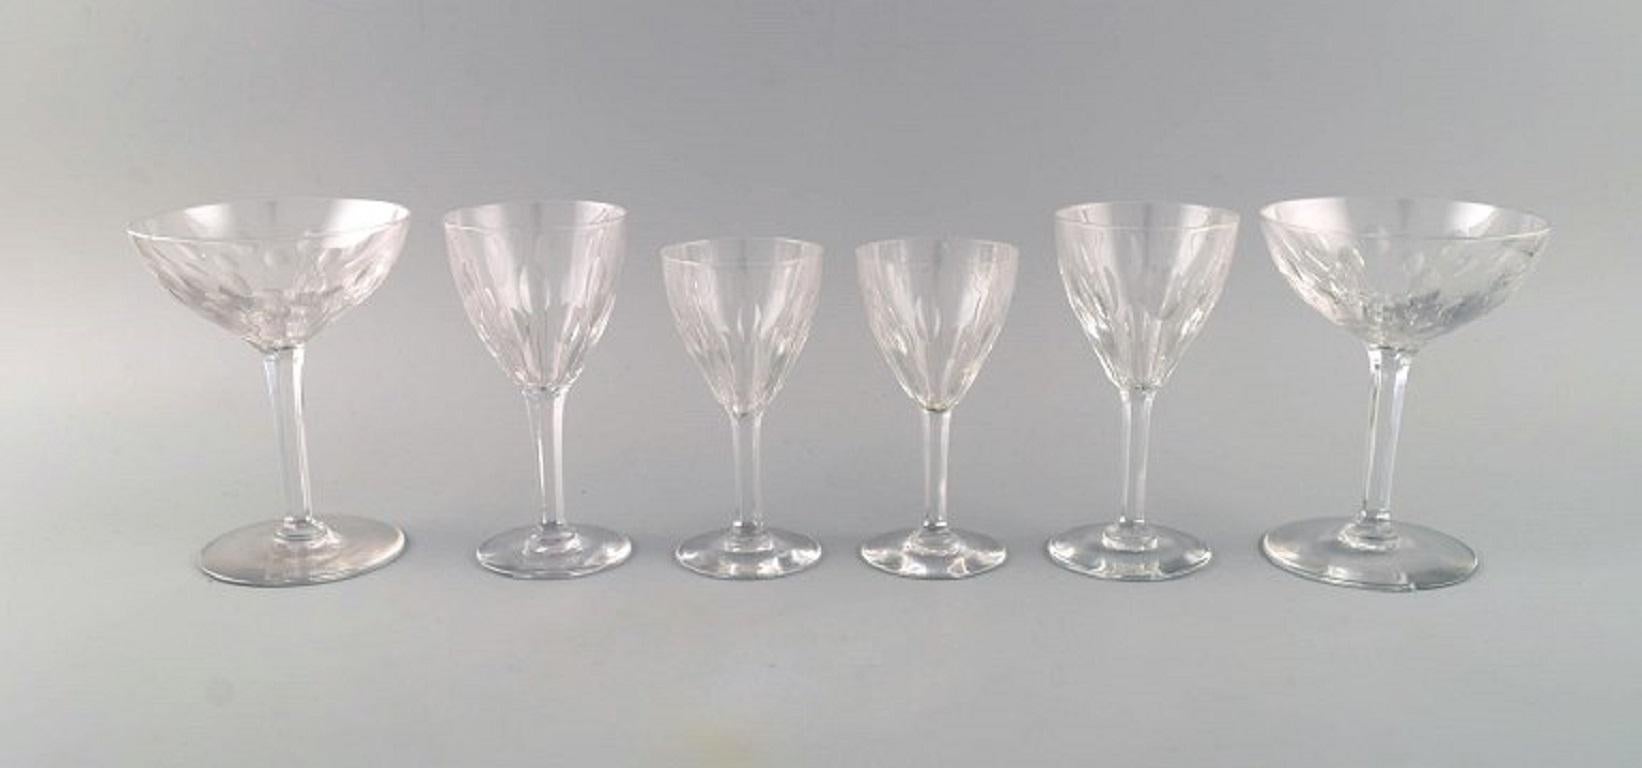 Baccarat, France. Six glasses in clear mouth-blown crystal glass. Mid-20th century.
Two sherry glasses, two wine glasses and two campaign bowls.
The champagne bowl measures: 14 x 10.8 cm.
In good condition. All glasses with a small shard.